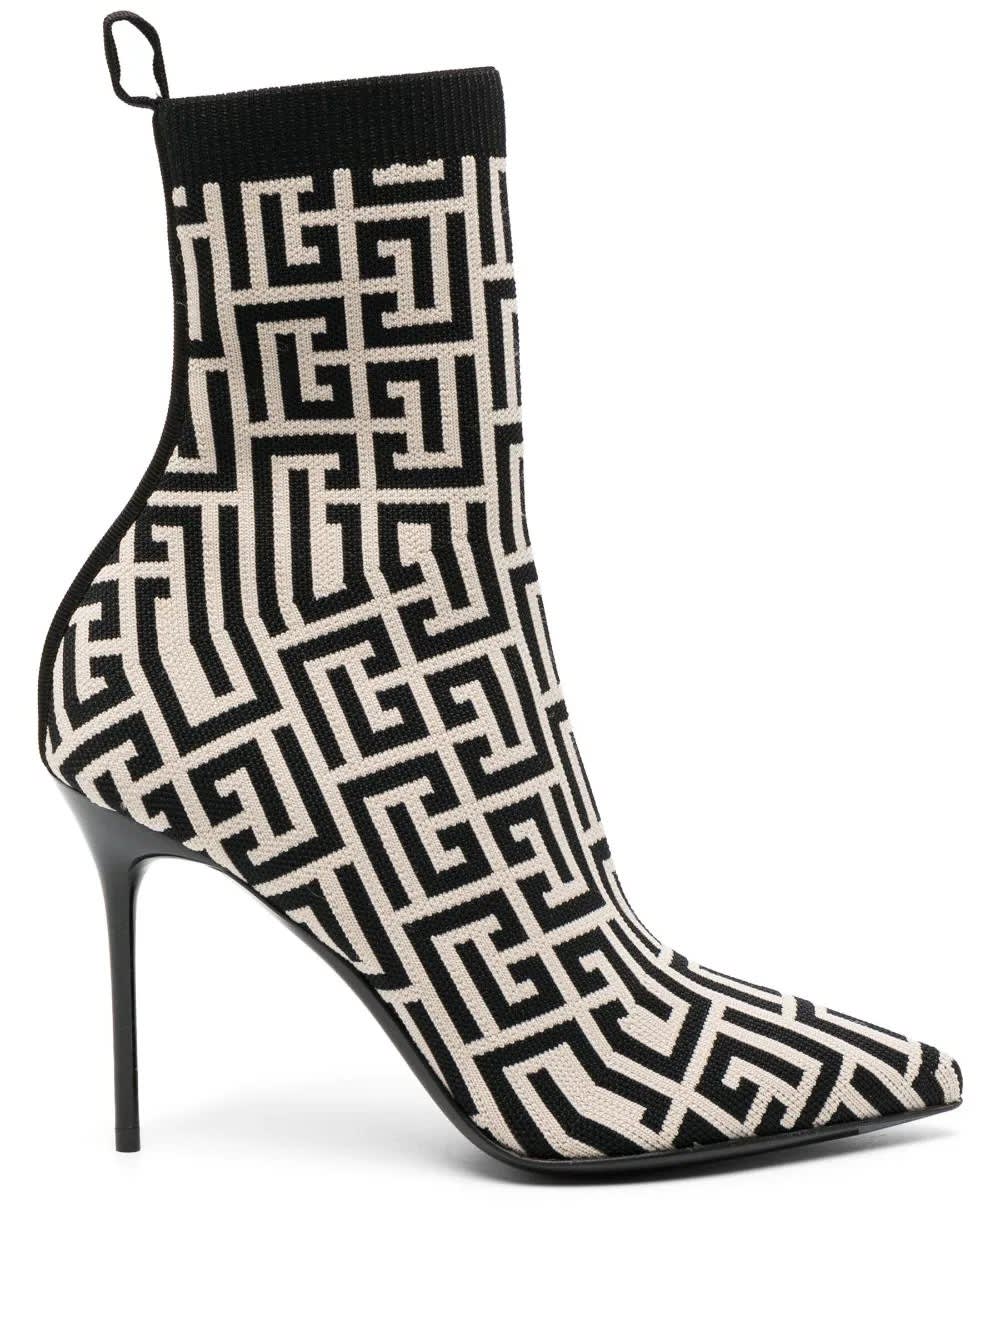 Balmain Black And Ivory Knitted Monogram Ankle Boots